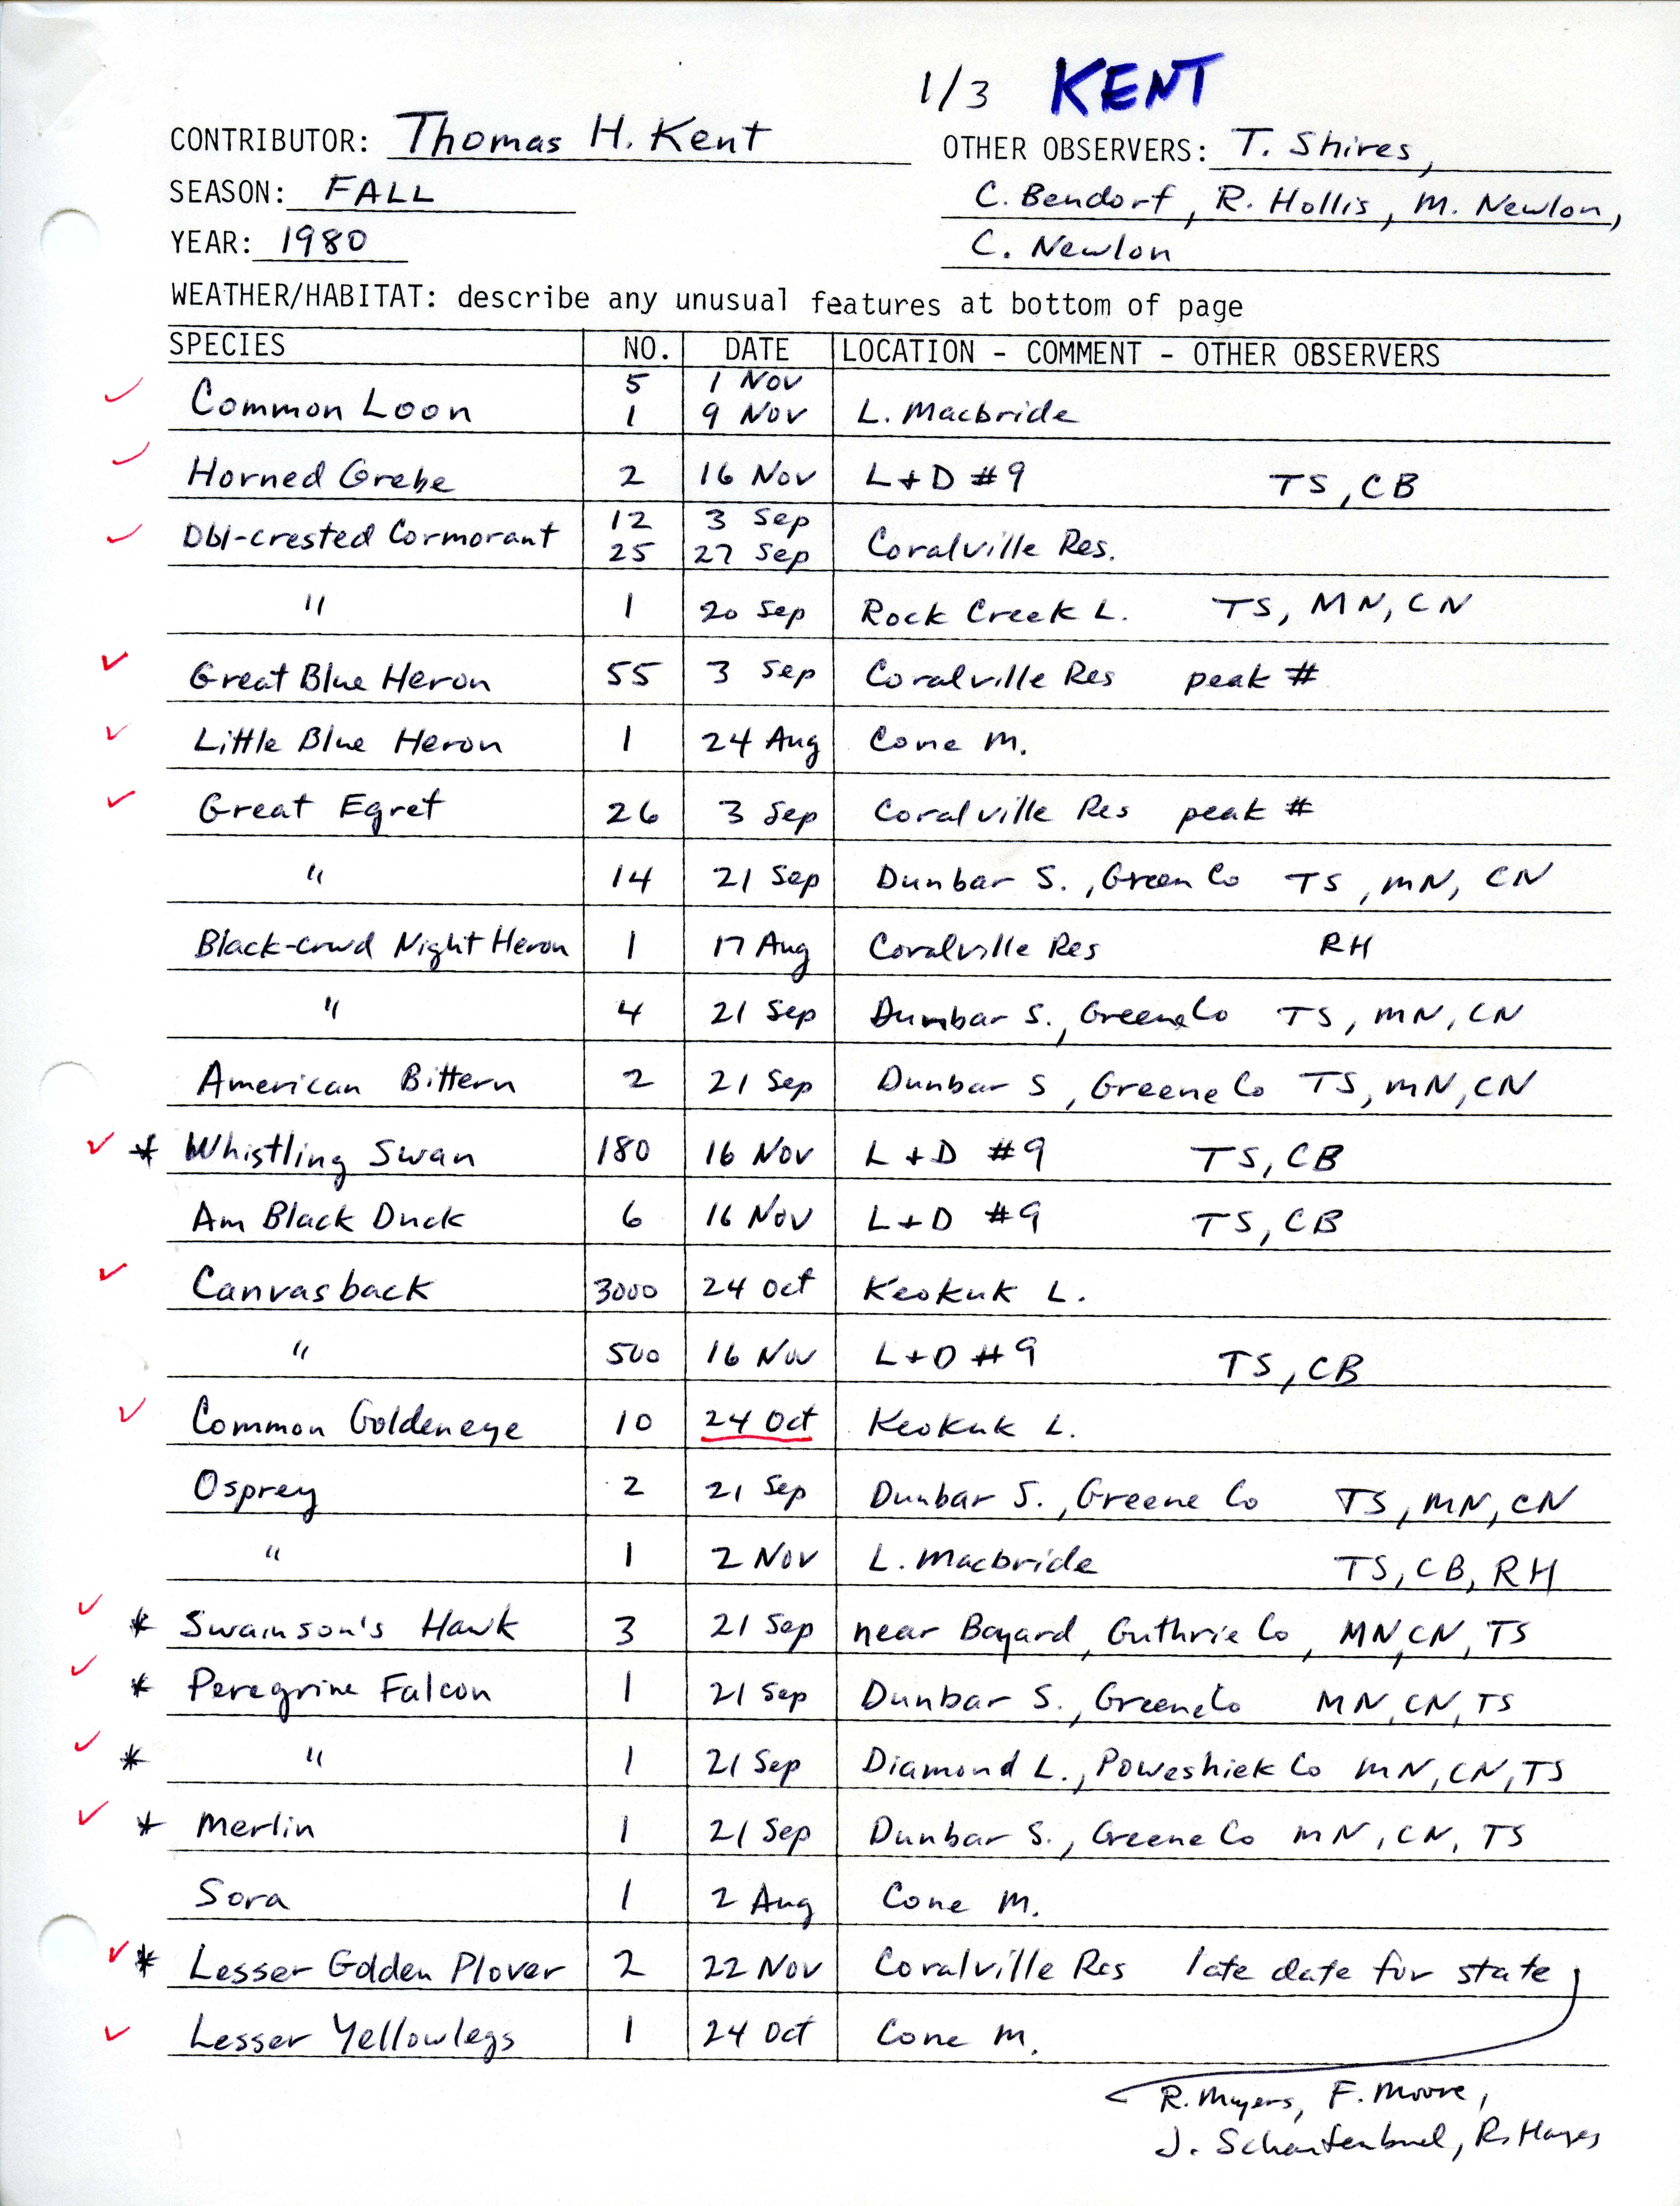 Annotated bird sighting list for Fall 1980 submitted by Thomas H. Kent